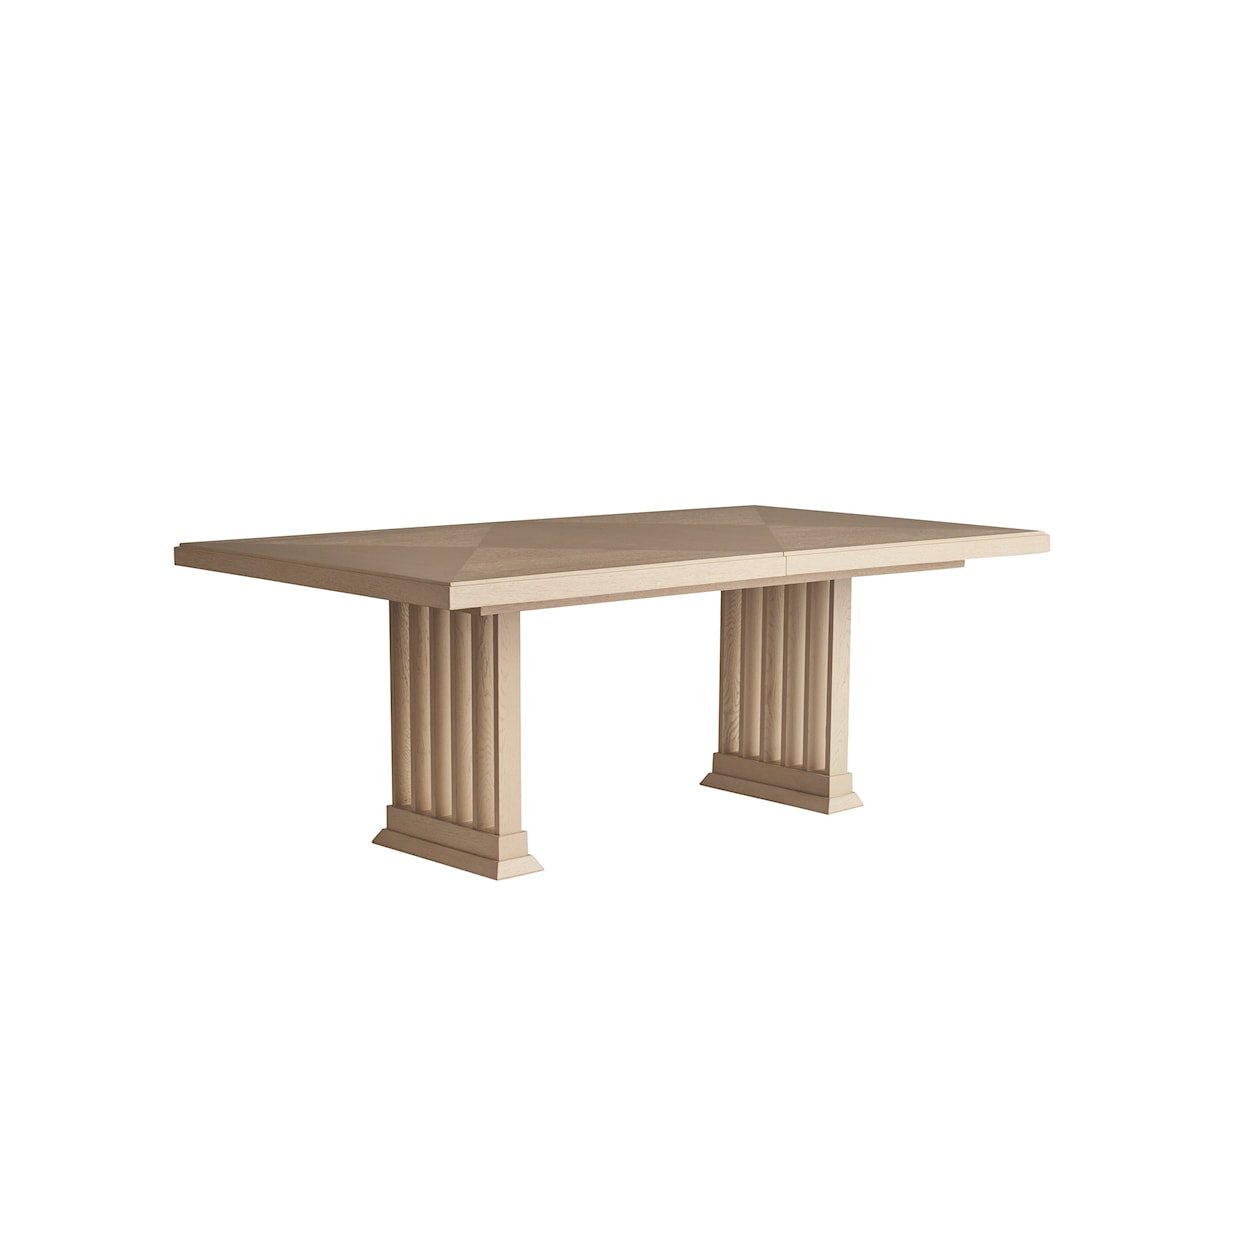 Tommy Bahama Home Sunset Key Belaire Rectangular Dining Table